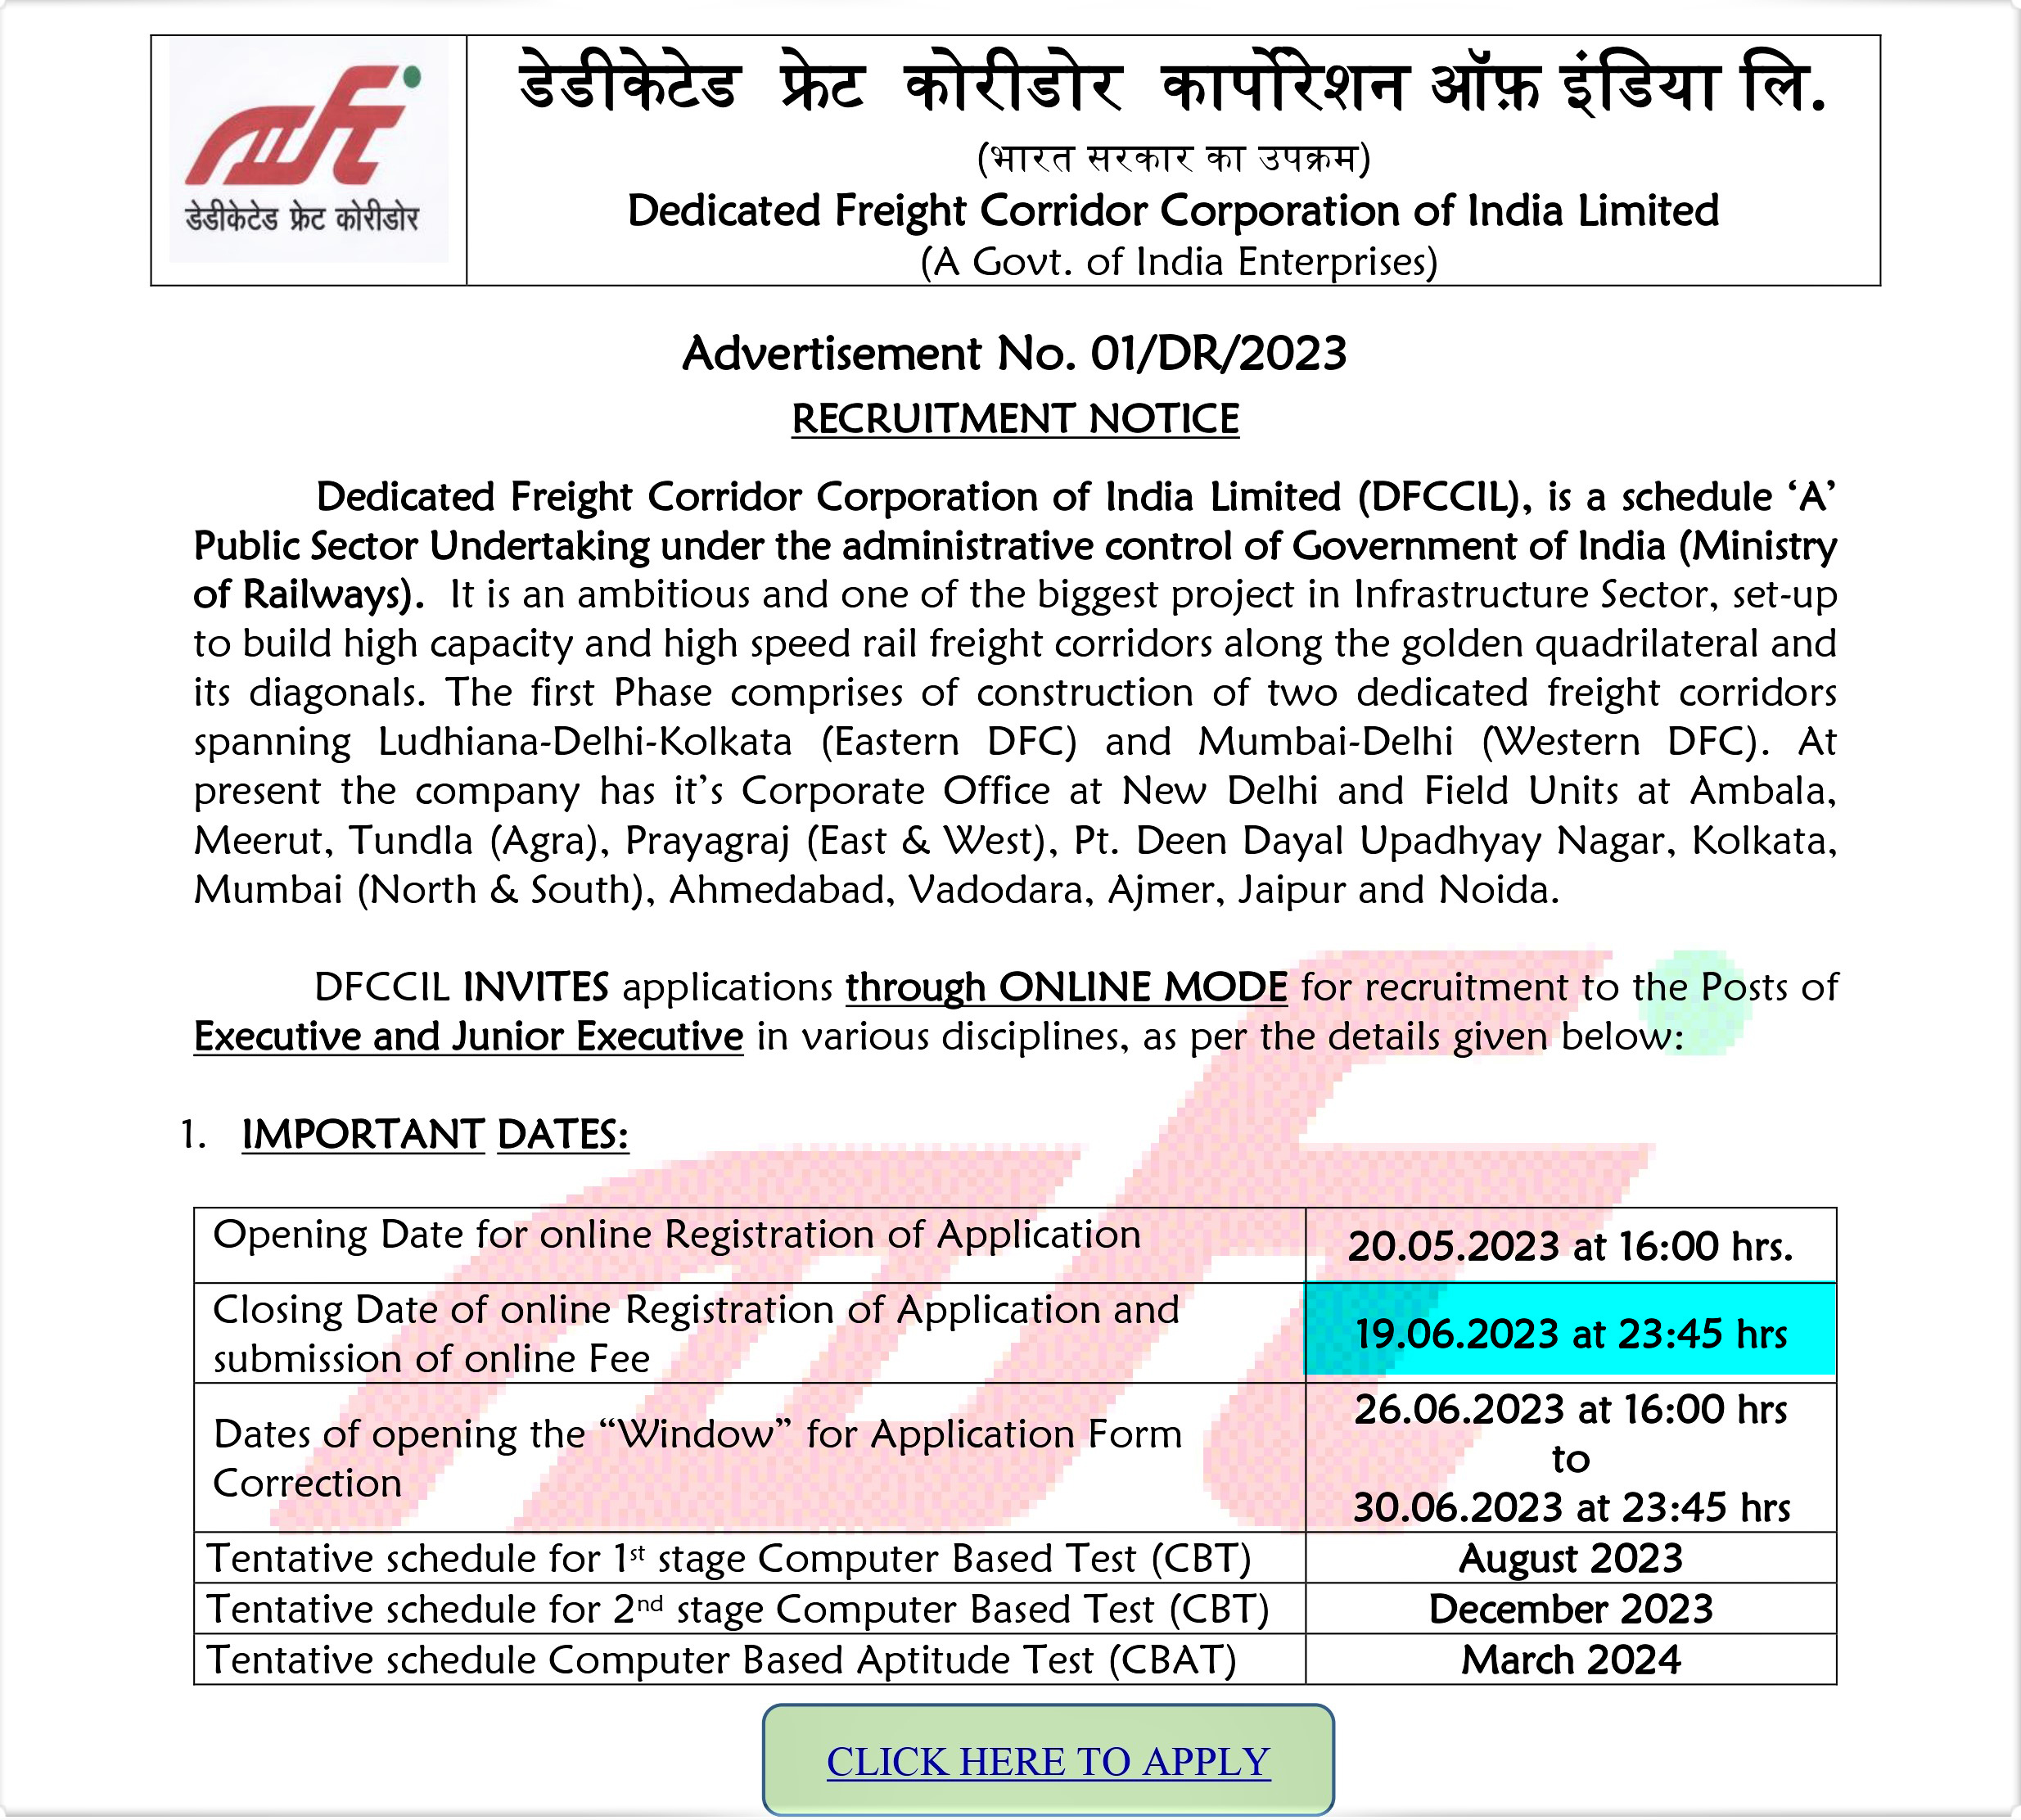 DFCCIL has given a notification for the recruitment of HR !